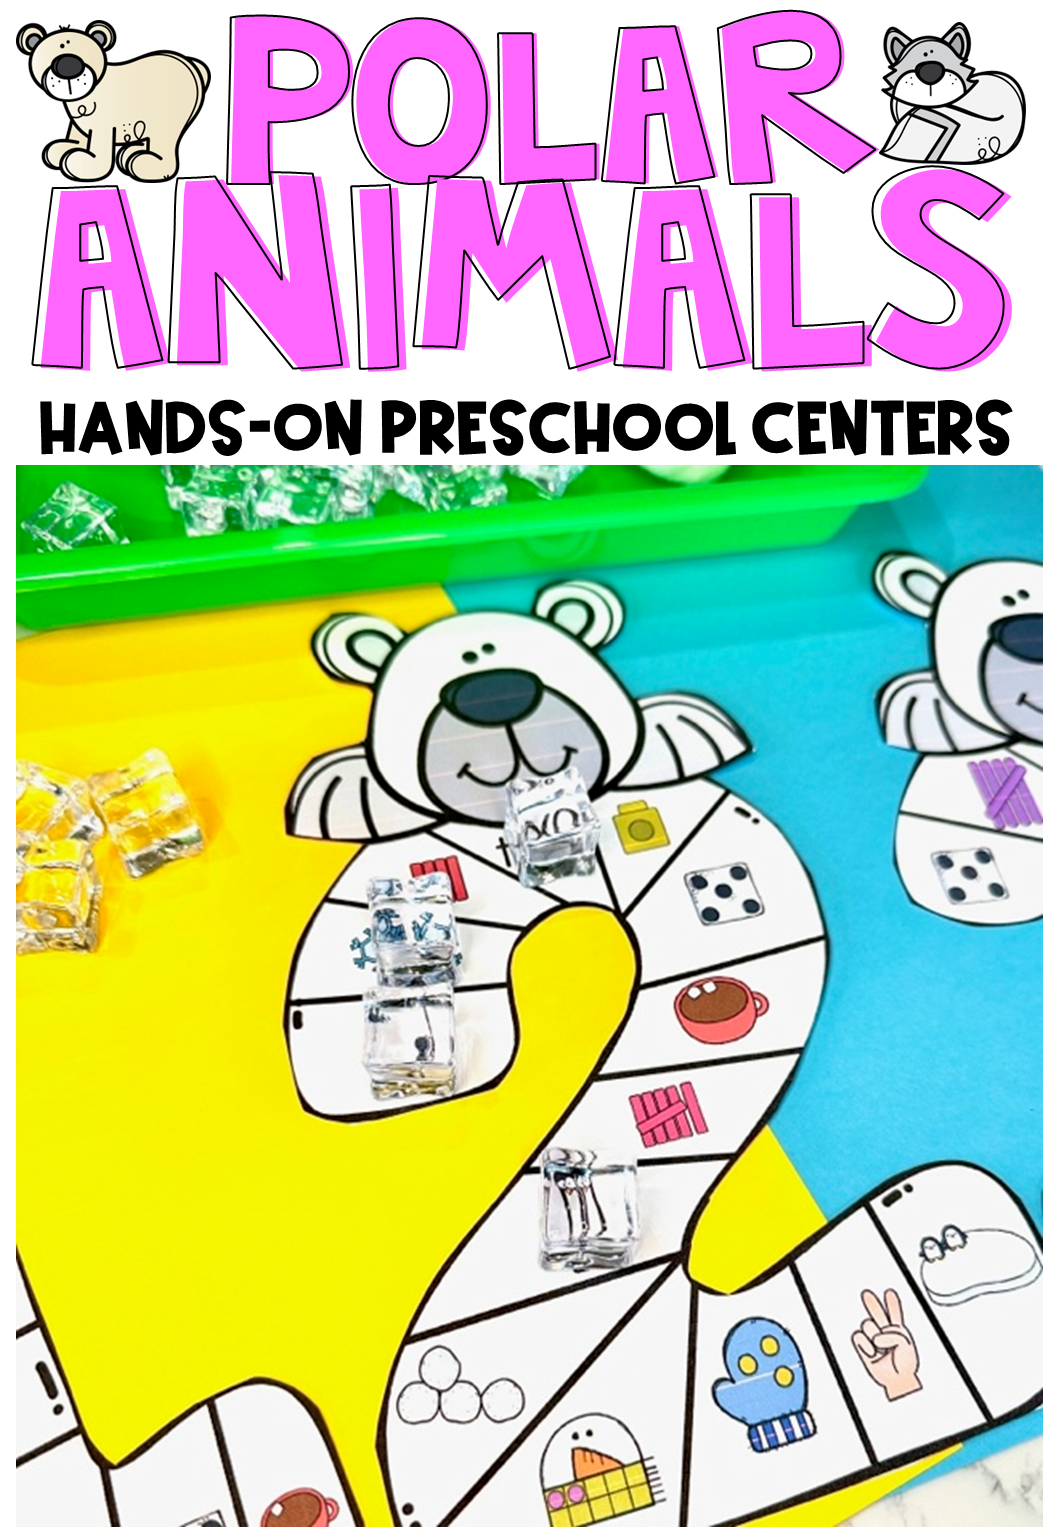 Are you looking for polar animal math and literacy centers for your preschool classroom for the month of January? Then you will love our Polar Animals Centers and Morning Bins for the winter months of preschool.